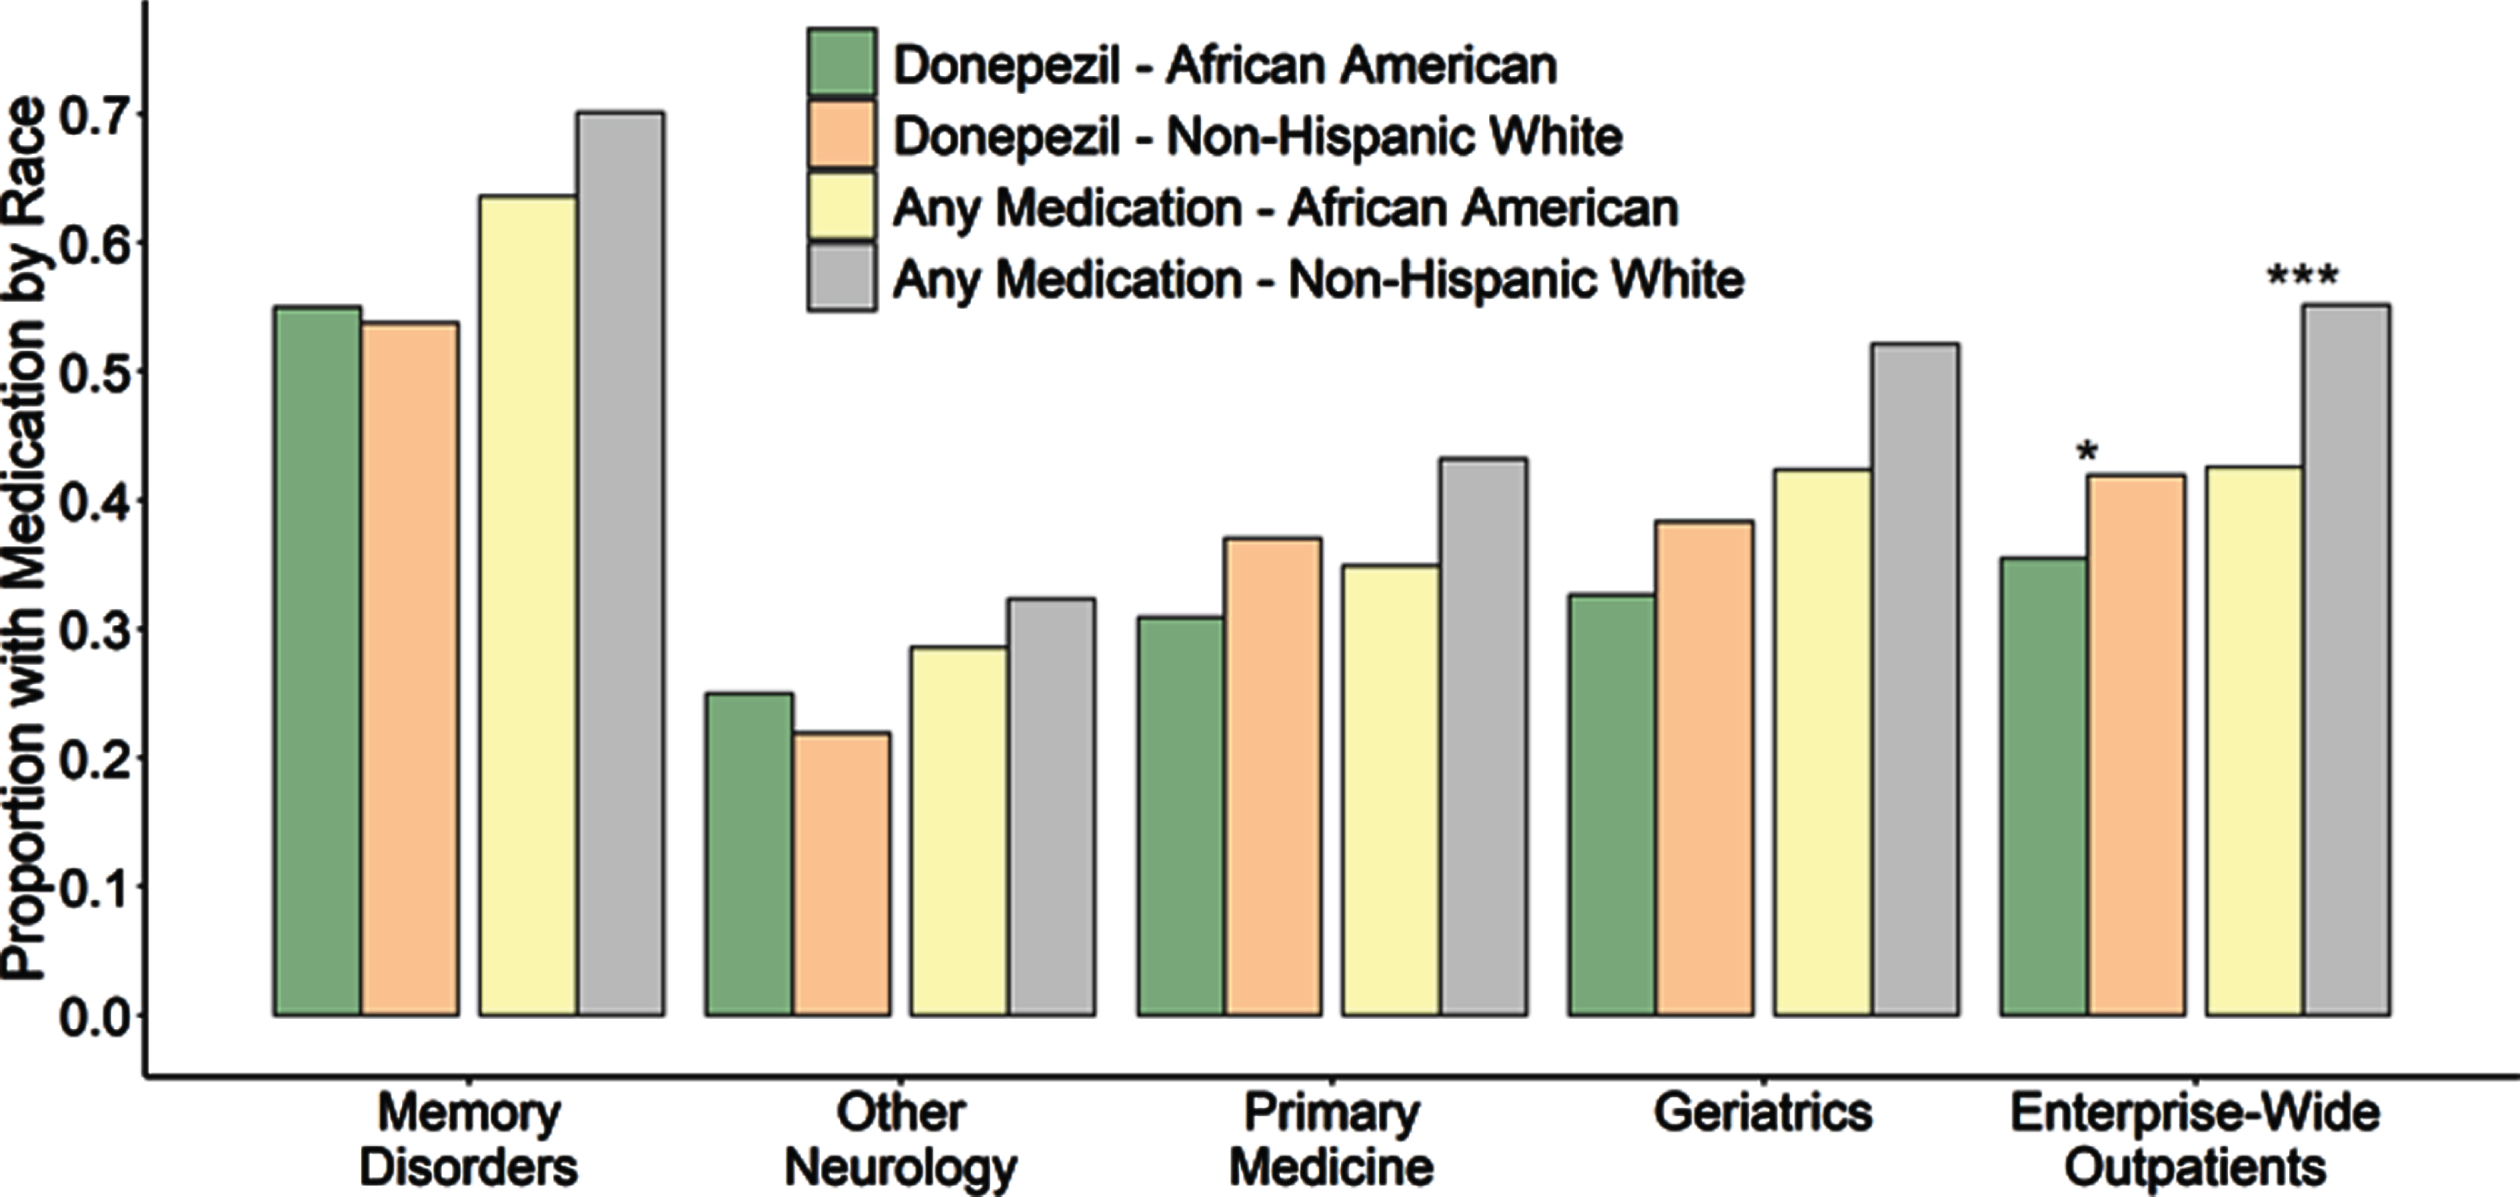 Proportion of AD/MCI outpatients with prescriptions for donepezil individually (left) as well as combined with other FDA-approved AD treatments including galantamine, rivastigmine and memantine (right), subset by race and clinic. Outpatients seen by Memory Disorders specialists were significantly more likely to be using an antidementia medication compared to any other outpatient clinical setting individually or the entire medical system (p < 0.0001 for donepezil or all four FDA-approved medications for all settings, p-values not shown on plot). Within individual clinics, the African American proportion of AD/MCI patients using donepezil did not differ from the non-Hispanic white proportion of AD/MCI patients using donepezil or for any FDA-approved antidementia medication at any of the centers. However, due to the racial underrepresentation of African American AD/MCI outpatients in specialty settings and higher overall medication usage in Memory Disorders, both donepezil and overall medication use by African American AD/MCI patients was observed to be significantly lower than use by non-Hispanic whites when examined across the entire medical enterprise (p = 0.0035 and p < 0.0001 respectively). Although not indicated on this plot, memantine use for moderate to severe AD was lower for African Americans compared to non-Hispanic whites in Memory Disorders (p = 0.0008) and the Geriatrics clinics (p = 0.0070) as well as across the entire medical enterprise (p < 0.0001) when considered for all AD/MCI outpatients. However, within Memory Disorders, when specifically considering outpatients with Alabama Brief Cognitive Screener (ABCs) scores less than 14, indicative of moderate AD, there was no difference in the proportion of African Americans using memantine (37.0%) compared to non-Hispanic whites using the drug (45.1%, p = 0.53).